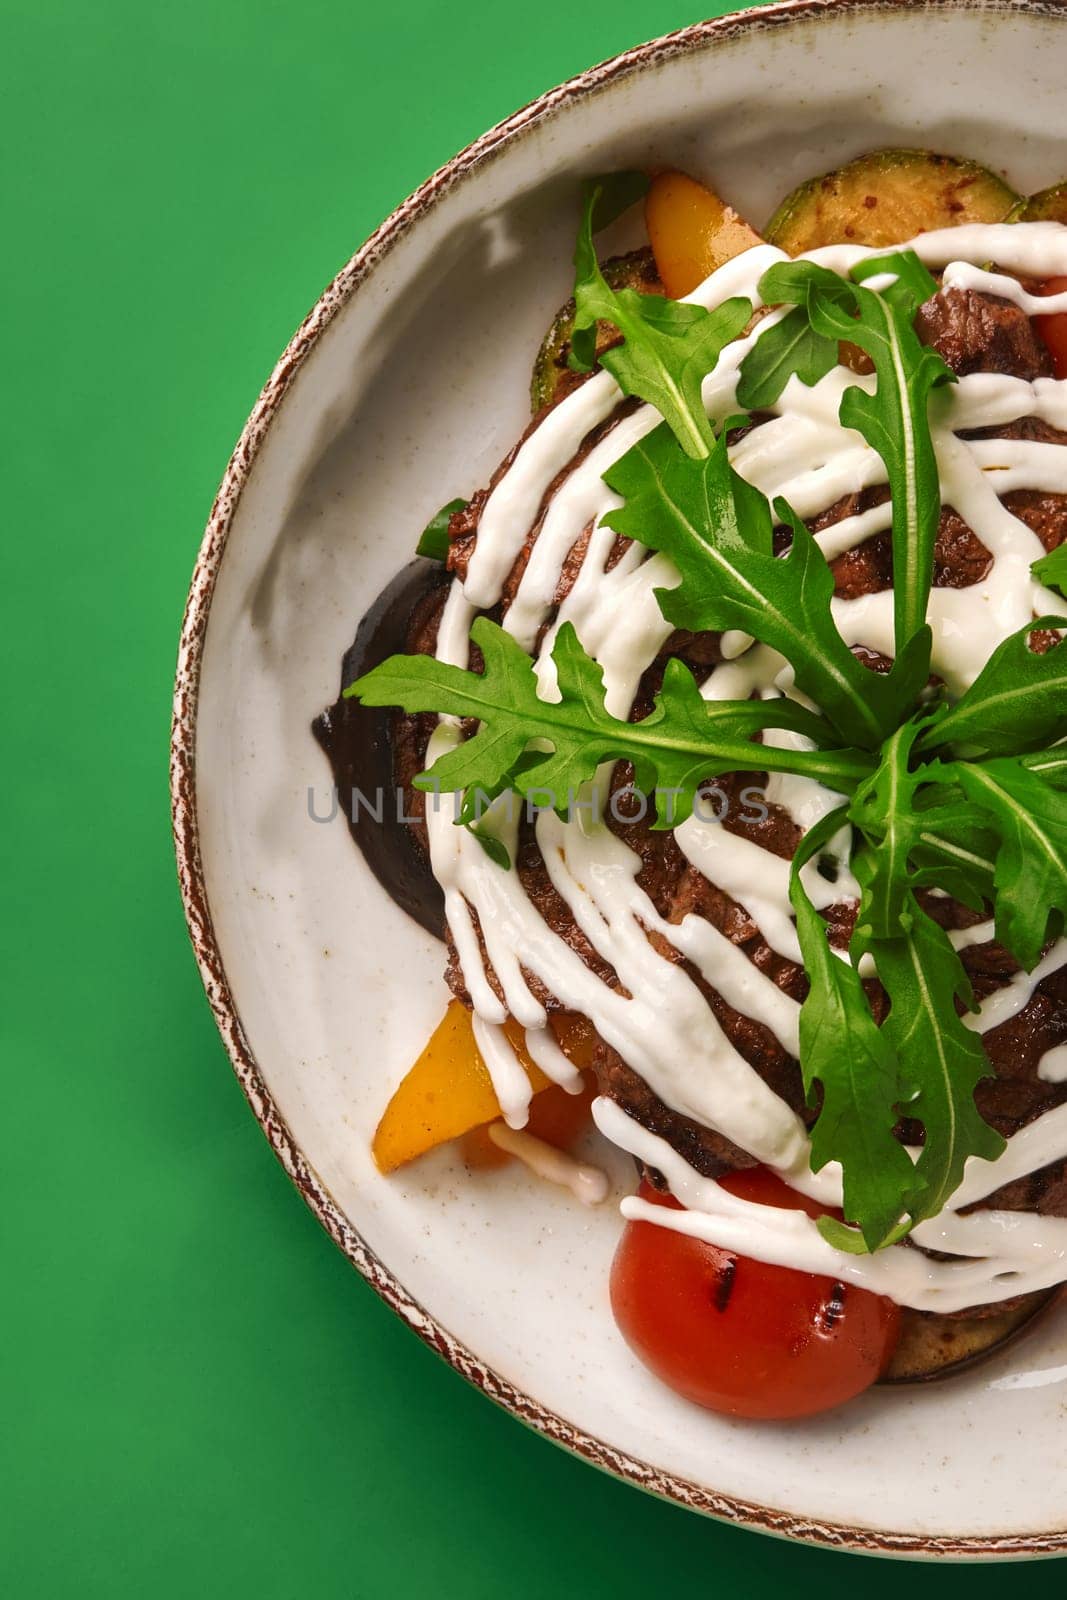 Comforting warm salad with grilled tender slices of beef and vegetables drizzled with creamy dressing, topped with fresh aromatic arugula, served in ceramic bowl on green backdrop